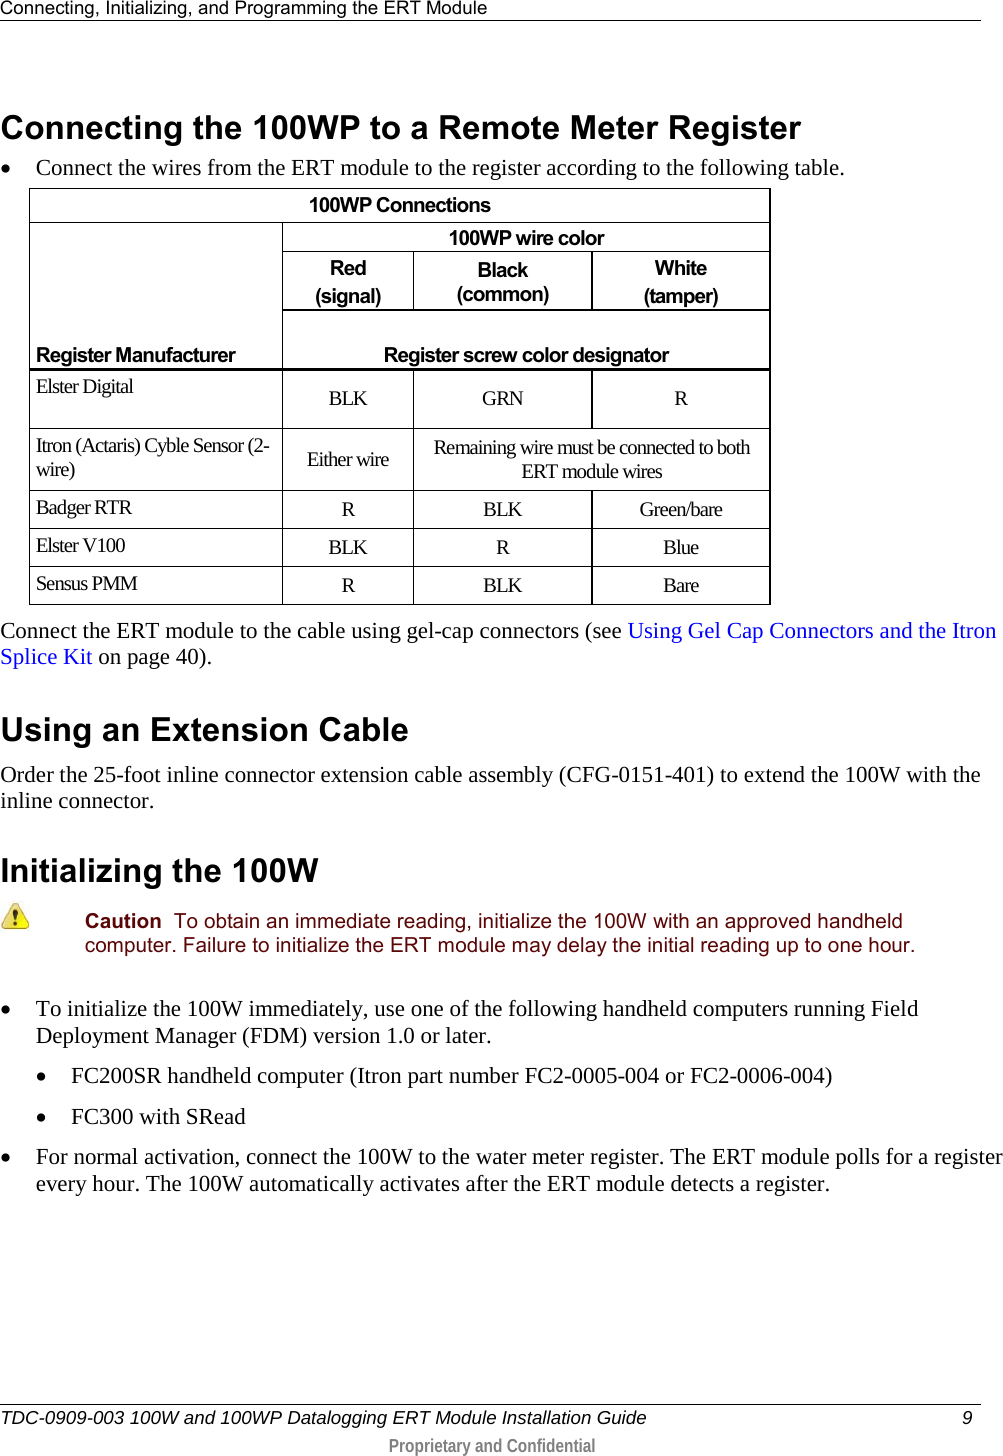 Connecting, Initializing, and Programming the ERT Module   TDC-0909-003 100W and 100WP Datalogging ERT Module Installation Guide  9   Proprietary and Confidential     Connecting the 100WP to a Remote Meter Register • Connect the wires from the ERT module to the register according to the following table.  100WP Connections    Register Manufacturer 100WP wire color Red (signal) Black (common) White (tamper)  Register screw color designator Elster Digital BLK GRN  R Itron (Actaris) Cyble Sensor (2-wire) Either wire Remaining wire must be connected to both ERT module wires Badger RTR R  BLK Green/bare Elster V100 BLK  R  Blue Sensus PMM R  BLK Bare Connect the ERT module to the cable using gel-cap connectors (see Using Gel Cap Connectors and the Itron Splice Kit on page 40).   Using an Extension Cable Order the 25-foot inline connector extension cable assembly (CFG-0151-401) to extend the 100W with the inline connector.   Initializing the 100W   Caution  To obtain an immediate reading, initialize the 100W with an approved handheld computer. Failure to initialize the ERT module may delay the initial reading up to one hour. • To initialize the 100W immediately, use one of the following handheld computers running Field Deployment Manager (FDM) version 1.0 or later.  • FC200SR handheld computer (Itron part number FC2-0005-004 or FC2-0006-004) • FC300 with SRead • For normal activation, connect the 100W to the water meter register. The ERT module polls for a register every hour. The 100W automatically activates after the ERT module detects a register.   